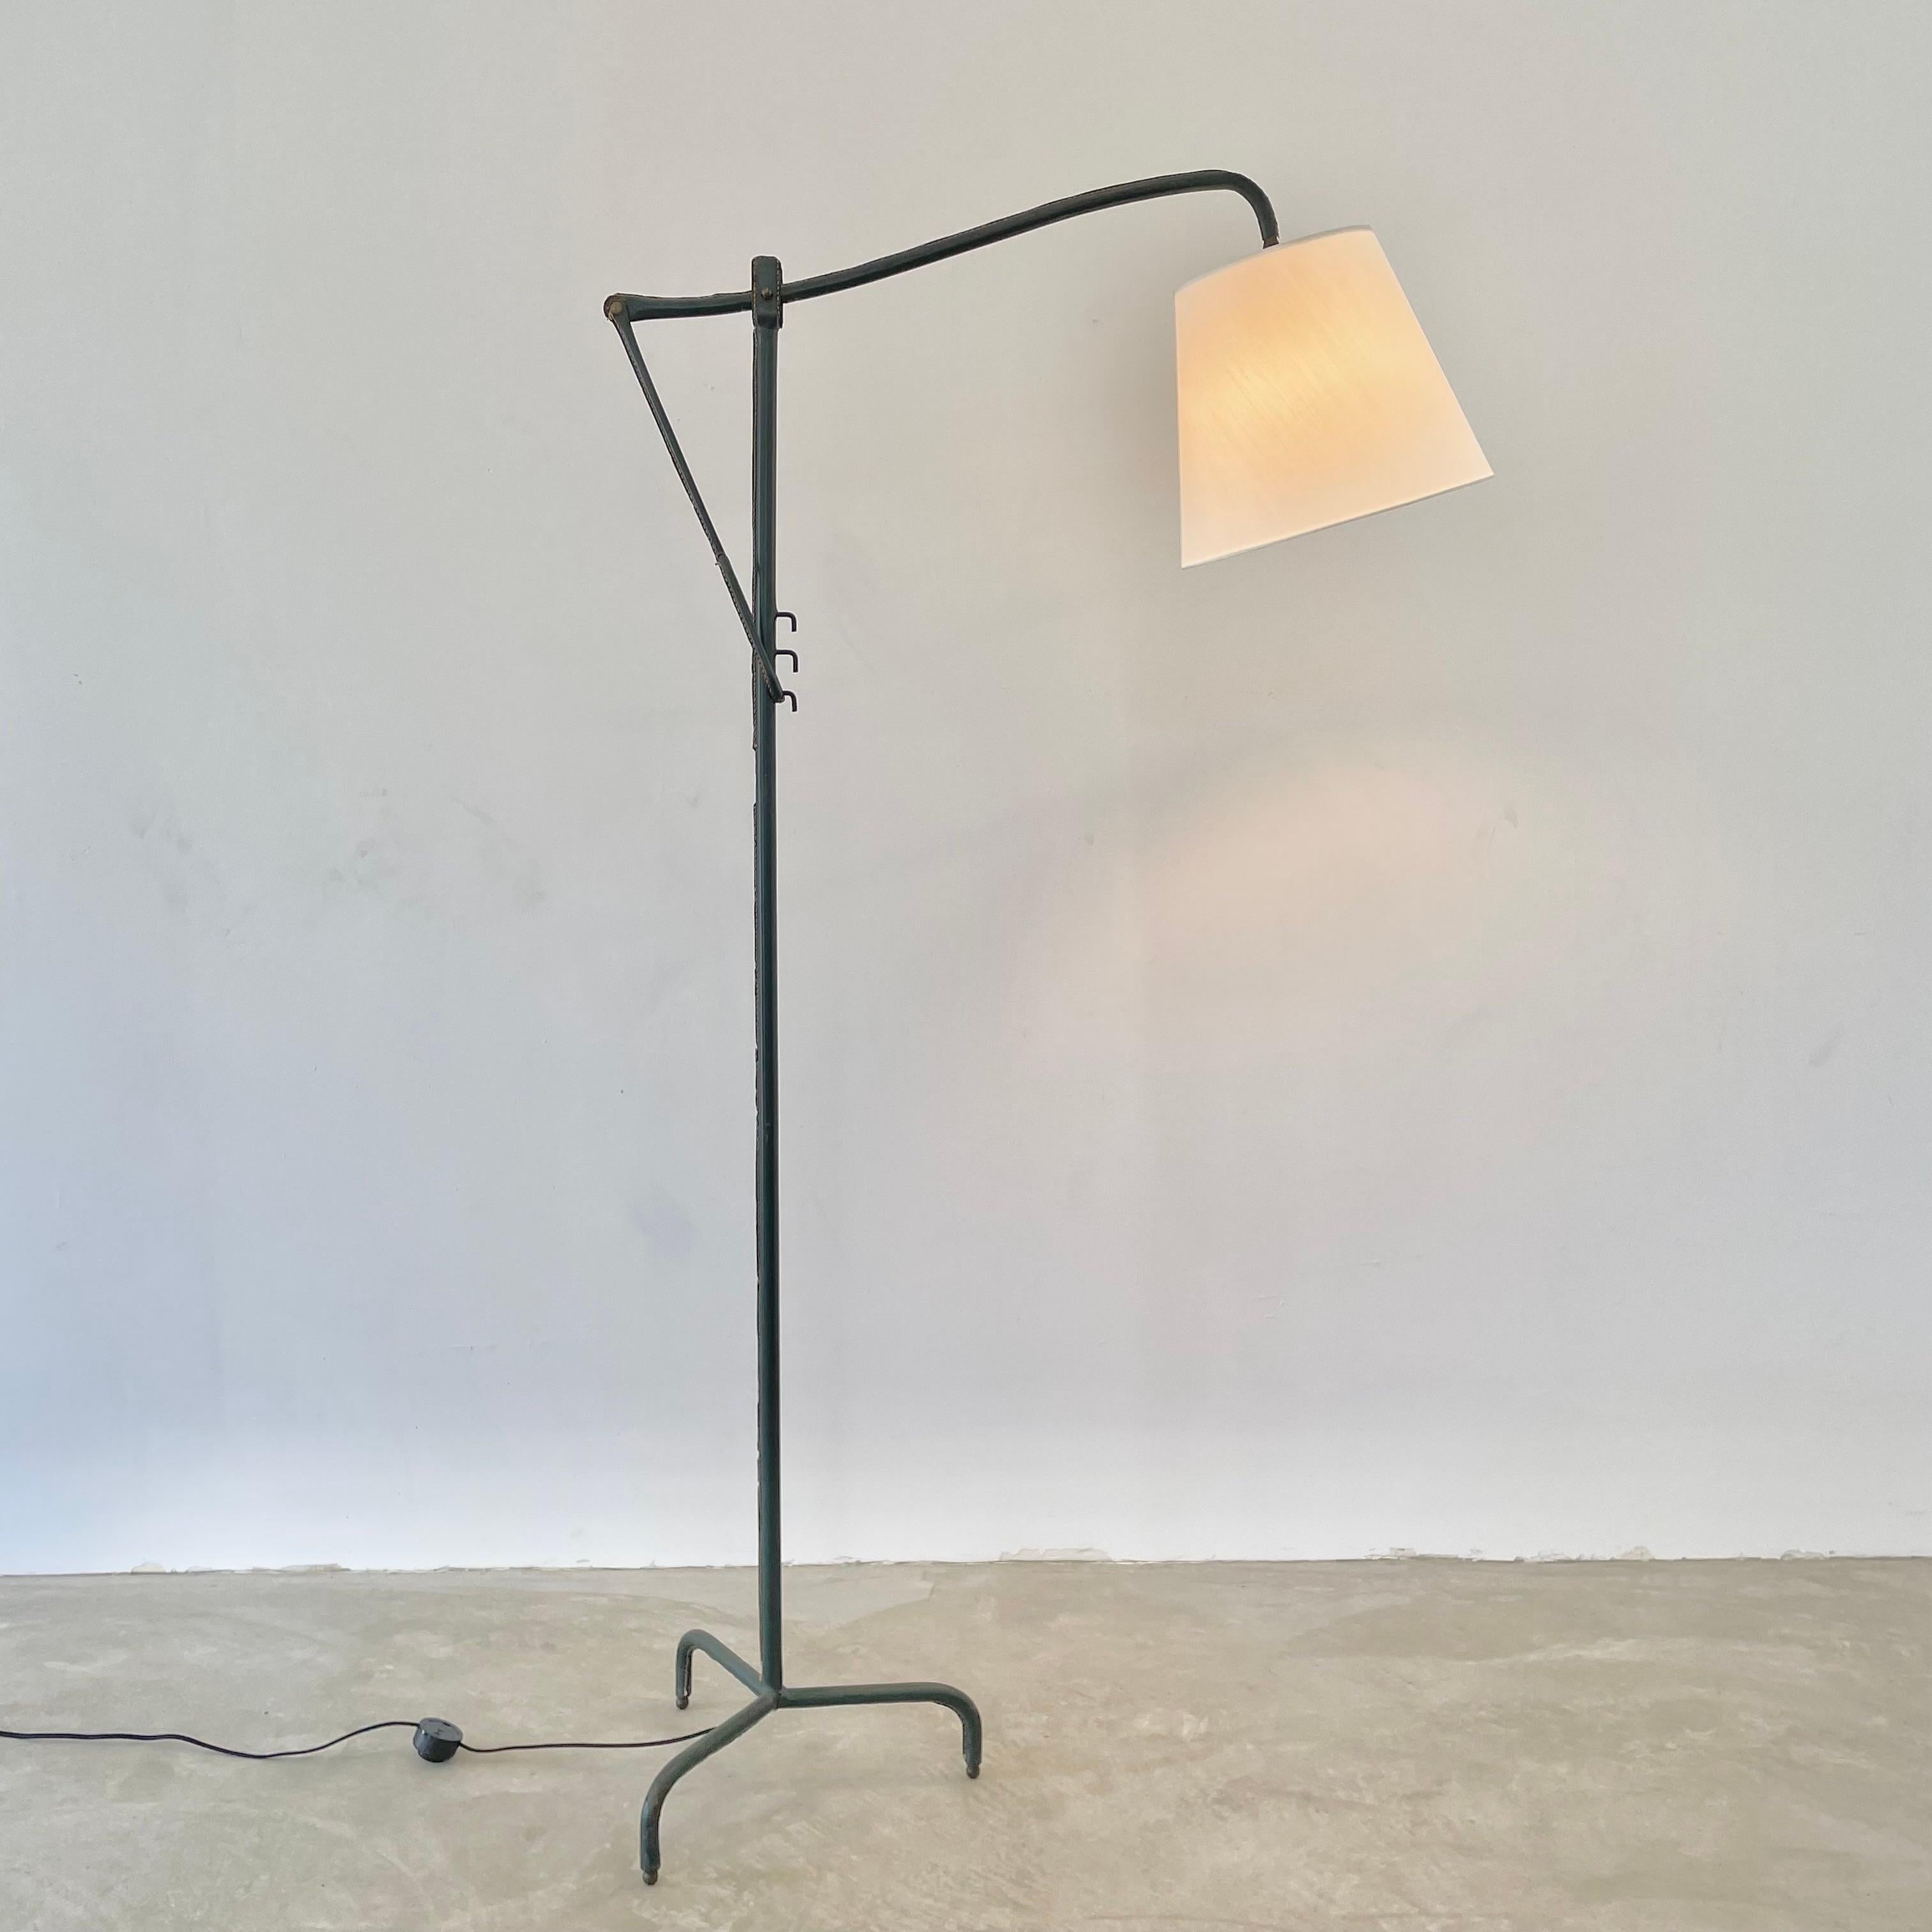 Handsome cantilever floor lamp completely wrapped in a deep green leather by French designer Jacques Adnet. Great sculptural lamp from all angles. Signature Adnet contrast stitching on every seam. Made in the 1950s. Tripod base with brass ball feet.